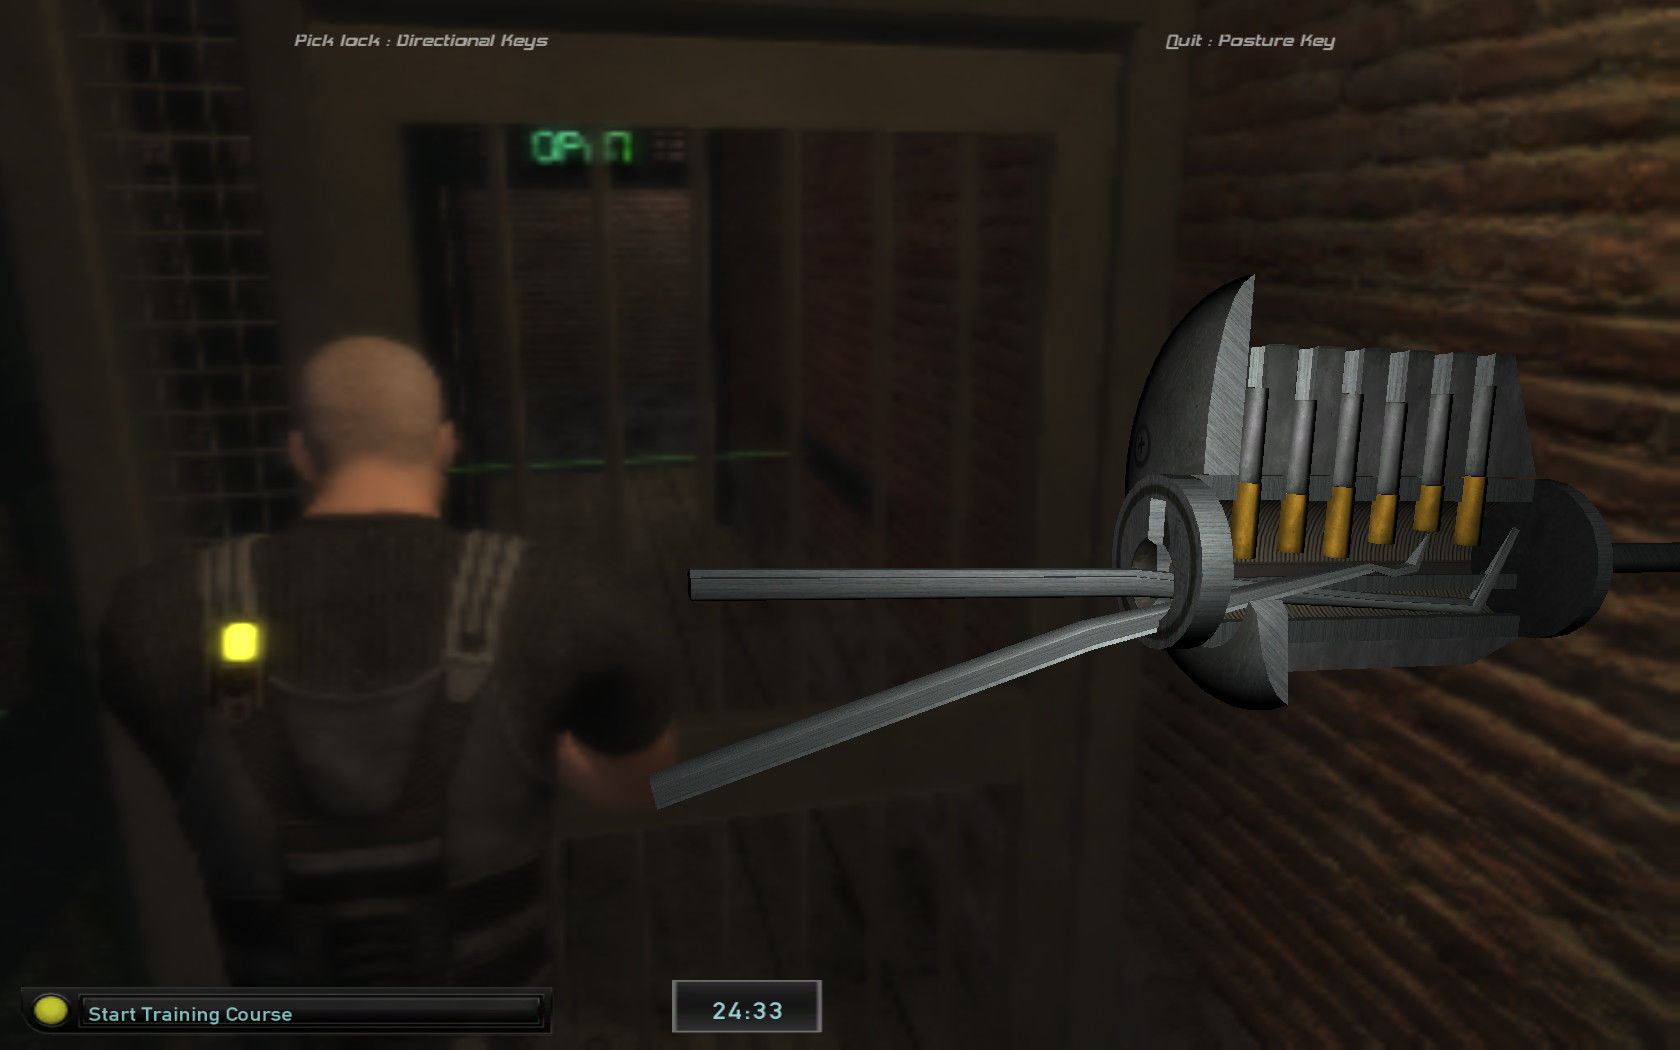 hack on splinter cell double agent pc